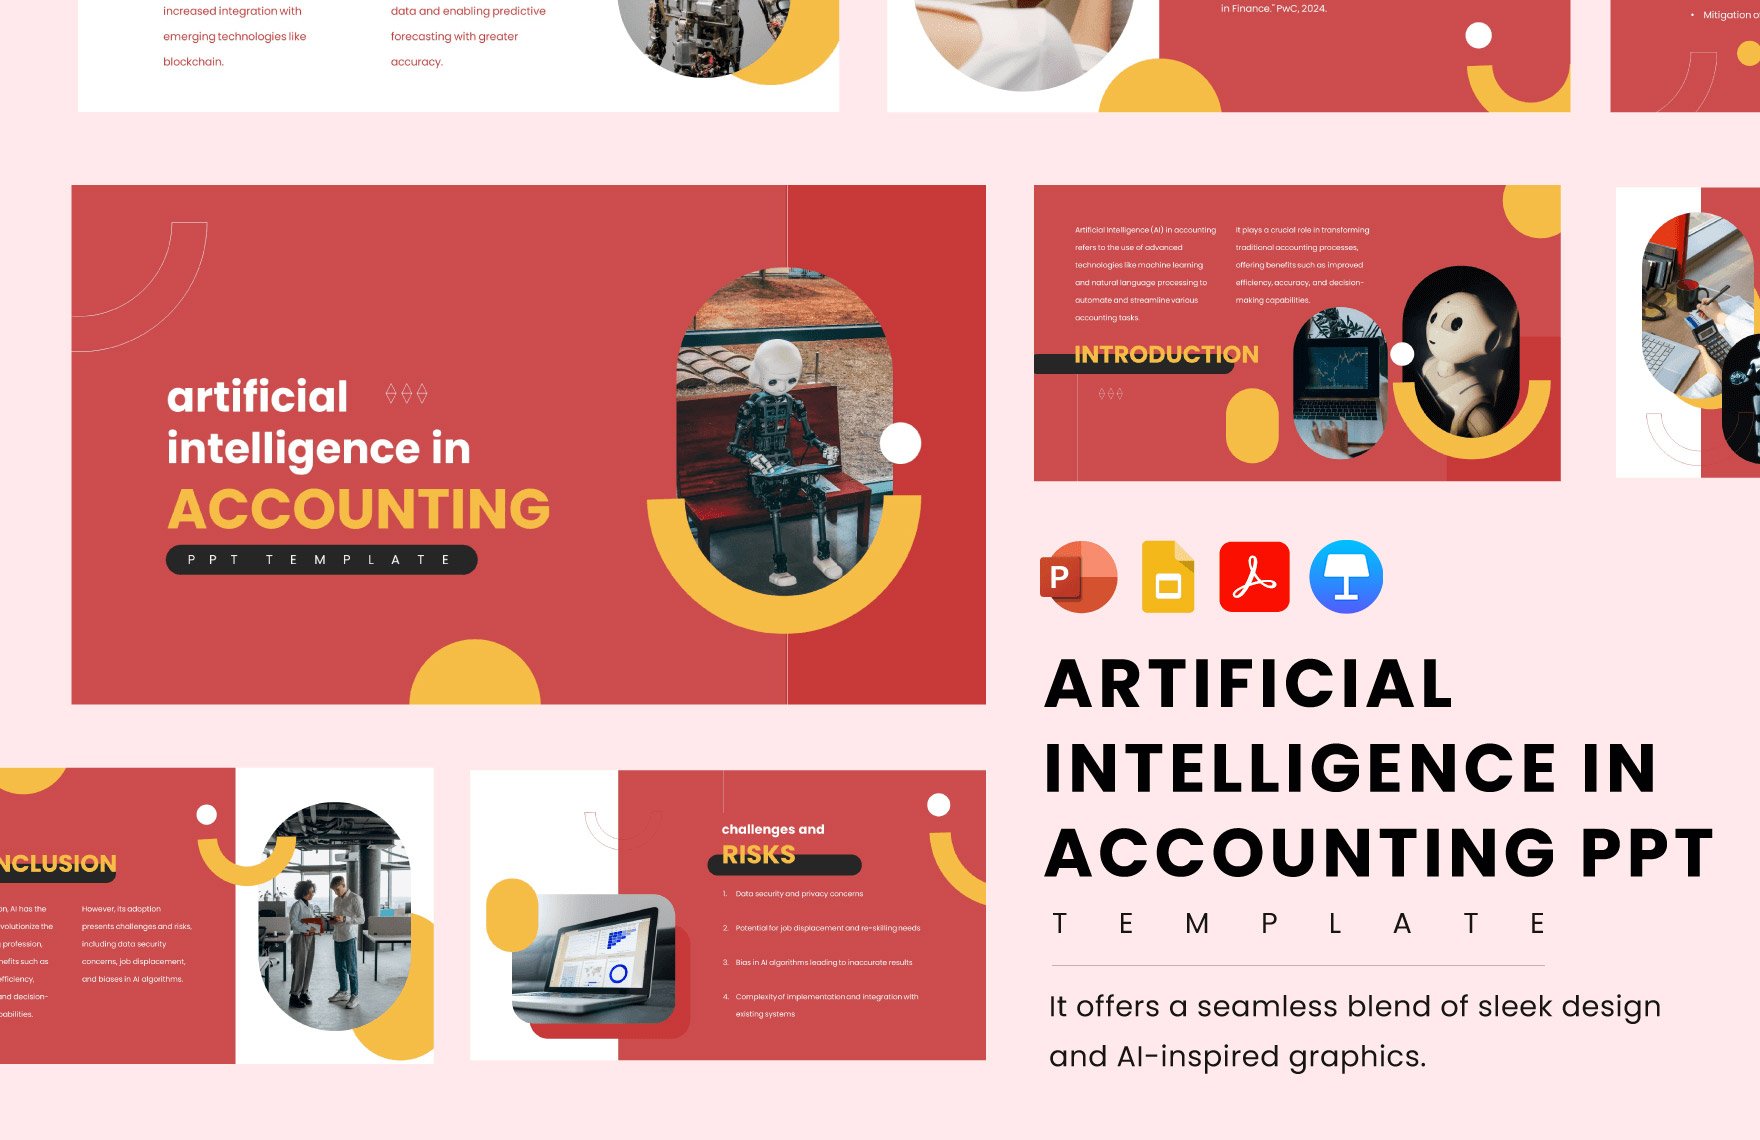 Artificial Intelligence in Accounting PPT Template in PDF, PowerPoint, Google Slides, Apple Keynote